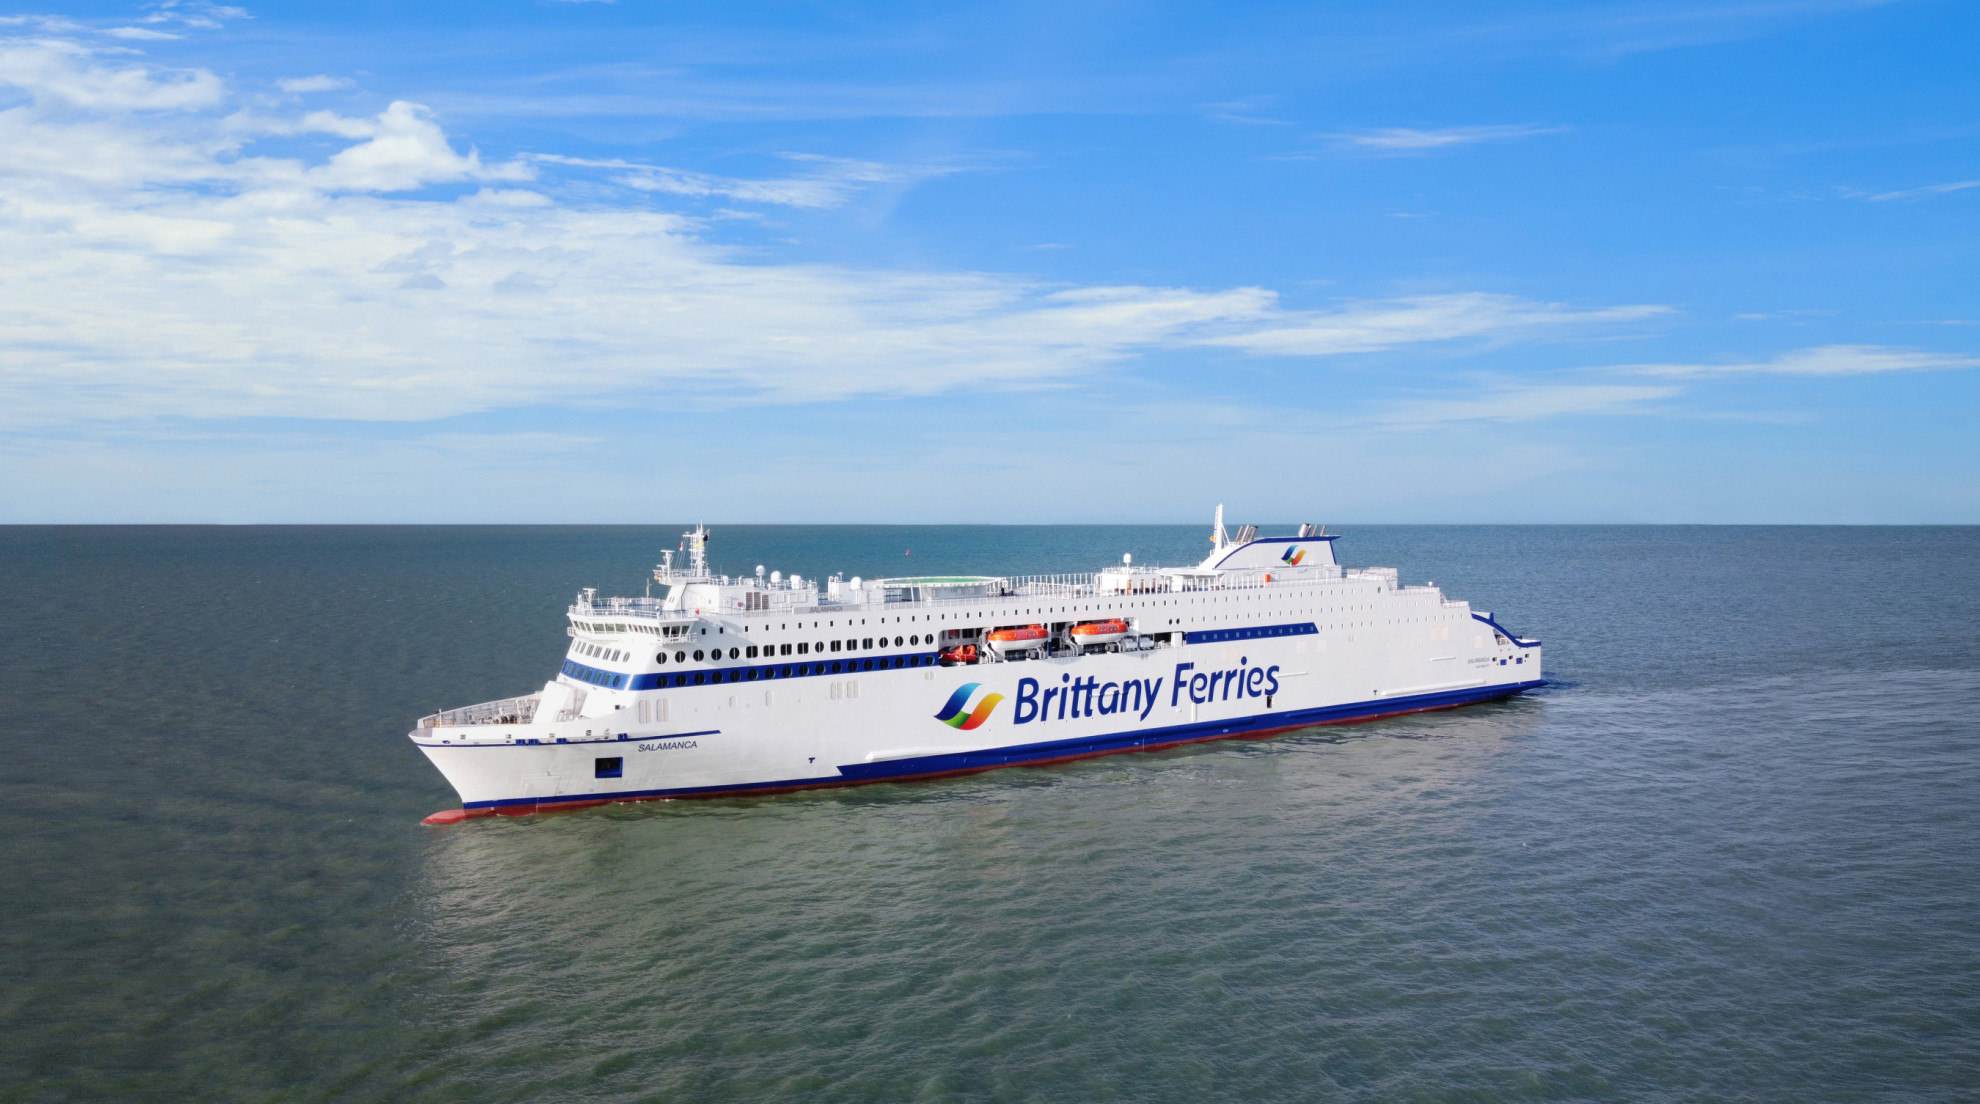 Moment connects Brittany Ferries for a memorable digital passenger experience 